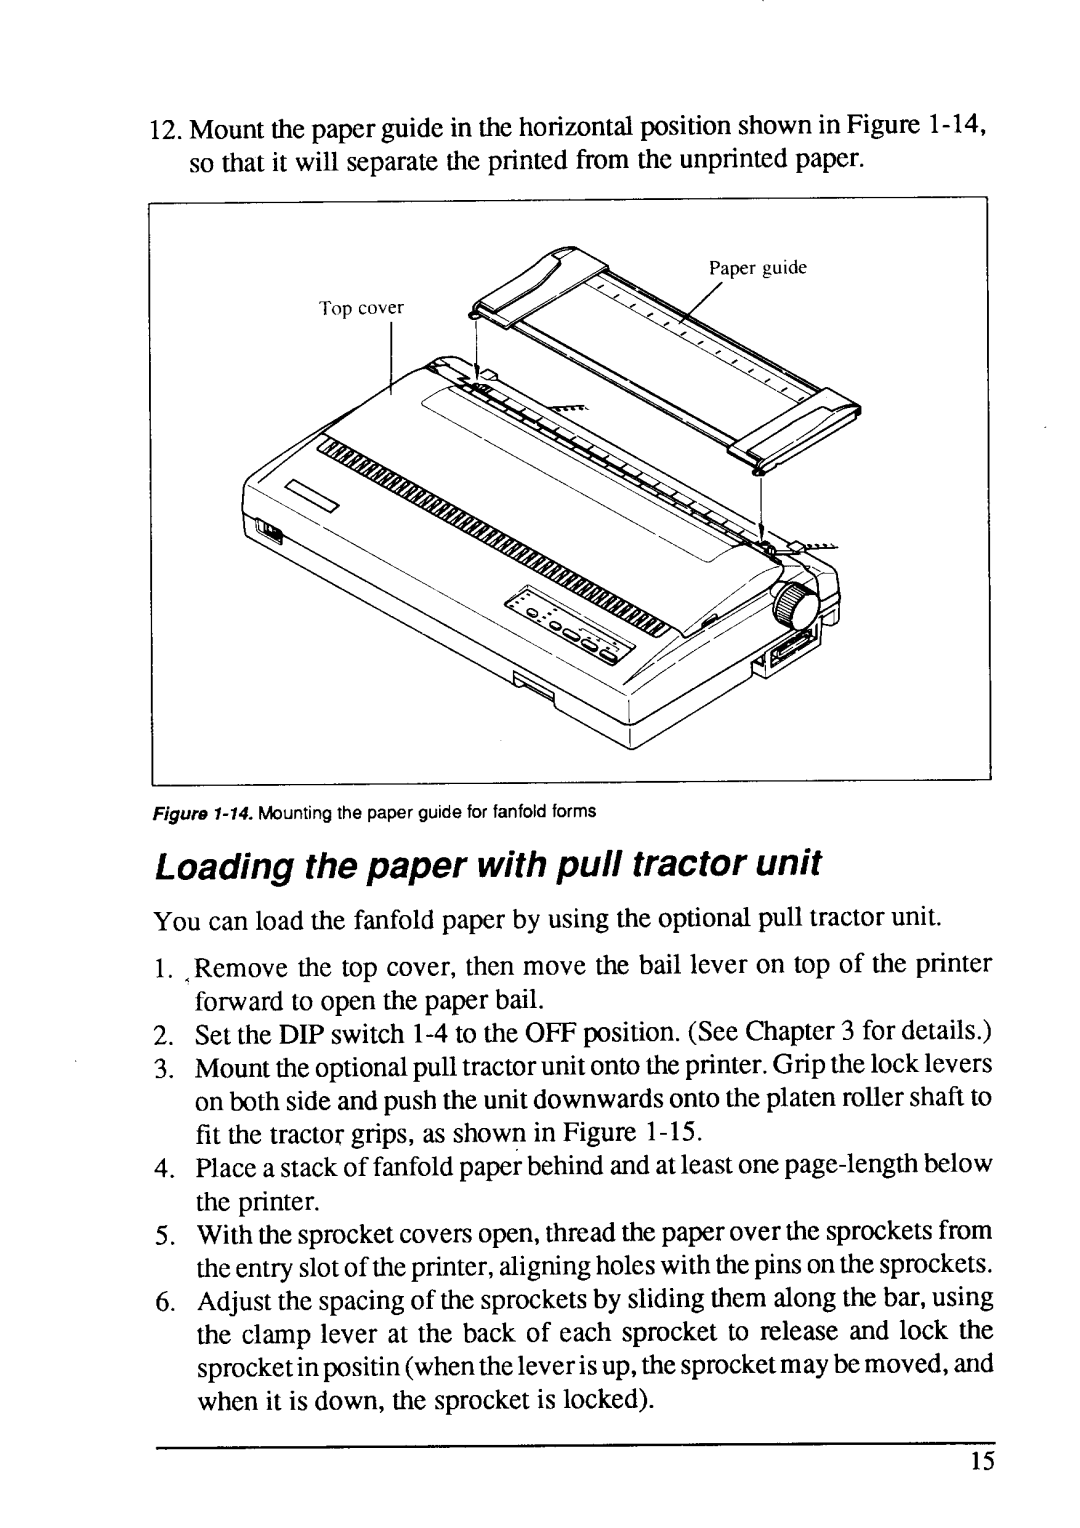 Star Micronics LC24-15 Loading the paper with pull tractor unit, Figure I-14. Mounting the paper guide for fanfold forms 